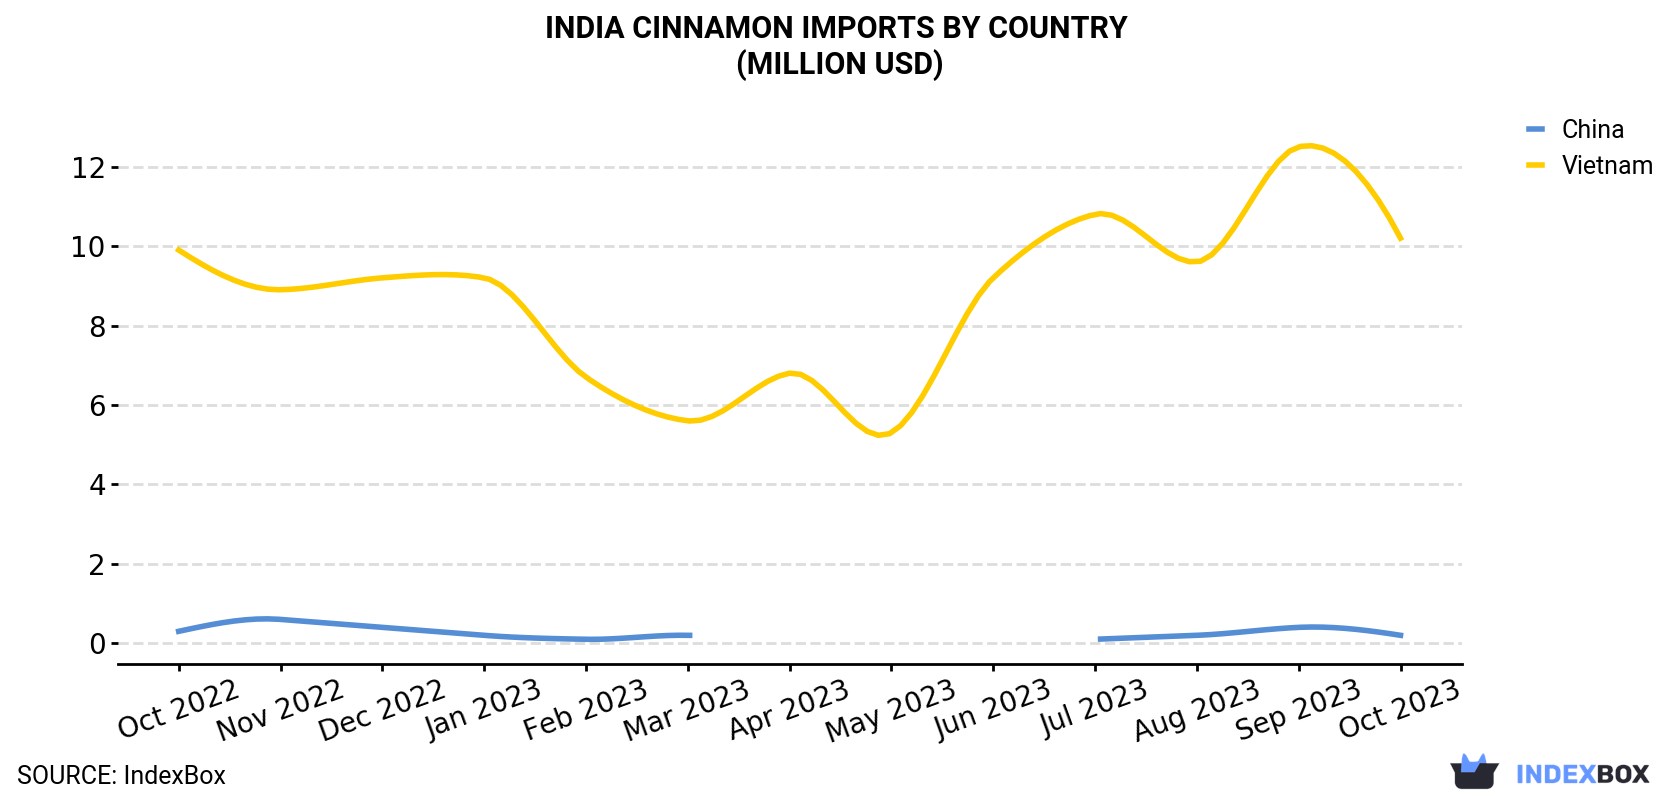 India Cinnamon Imports By Country (Million USD)